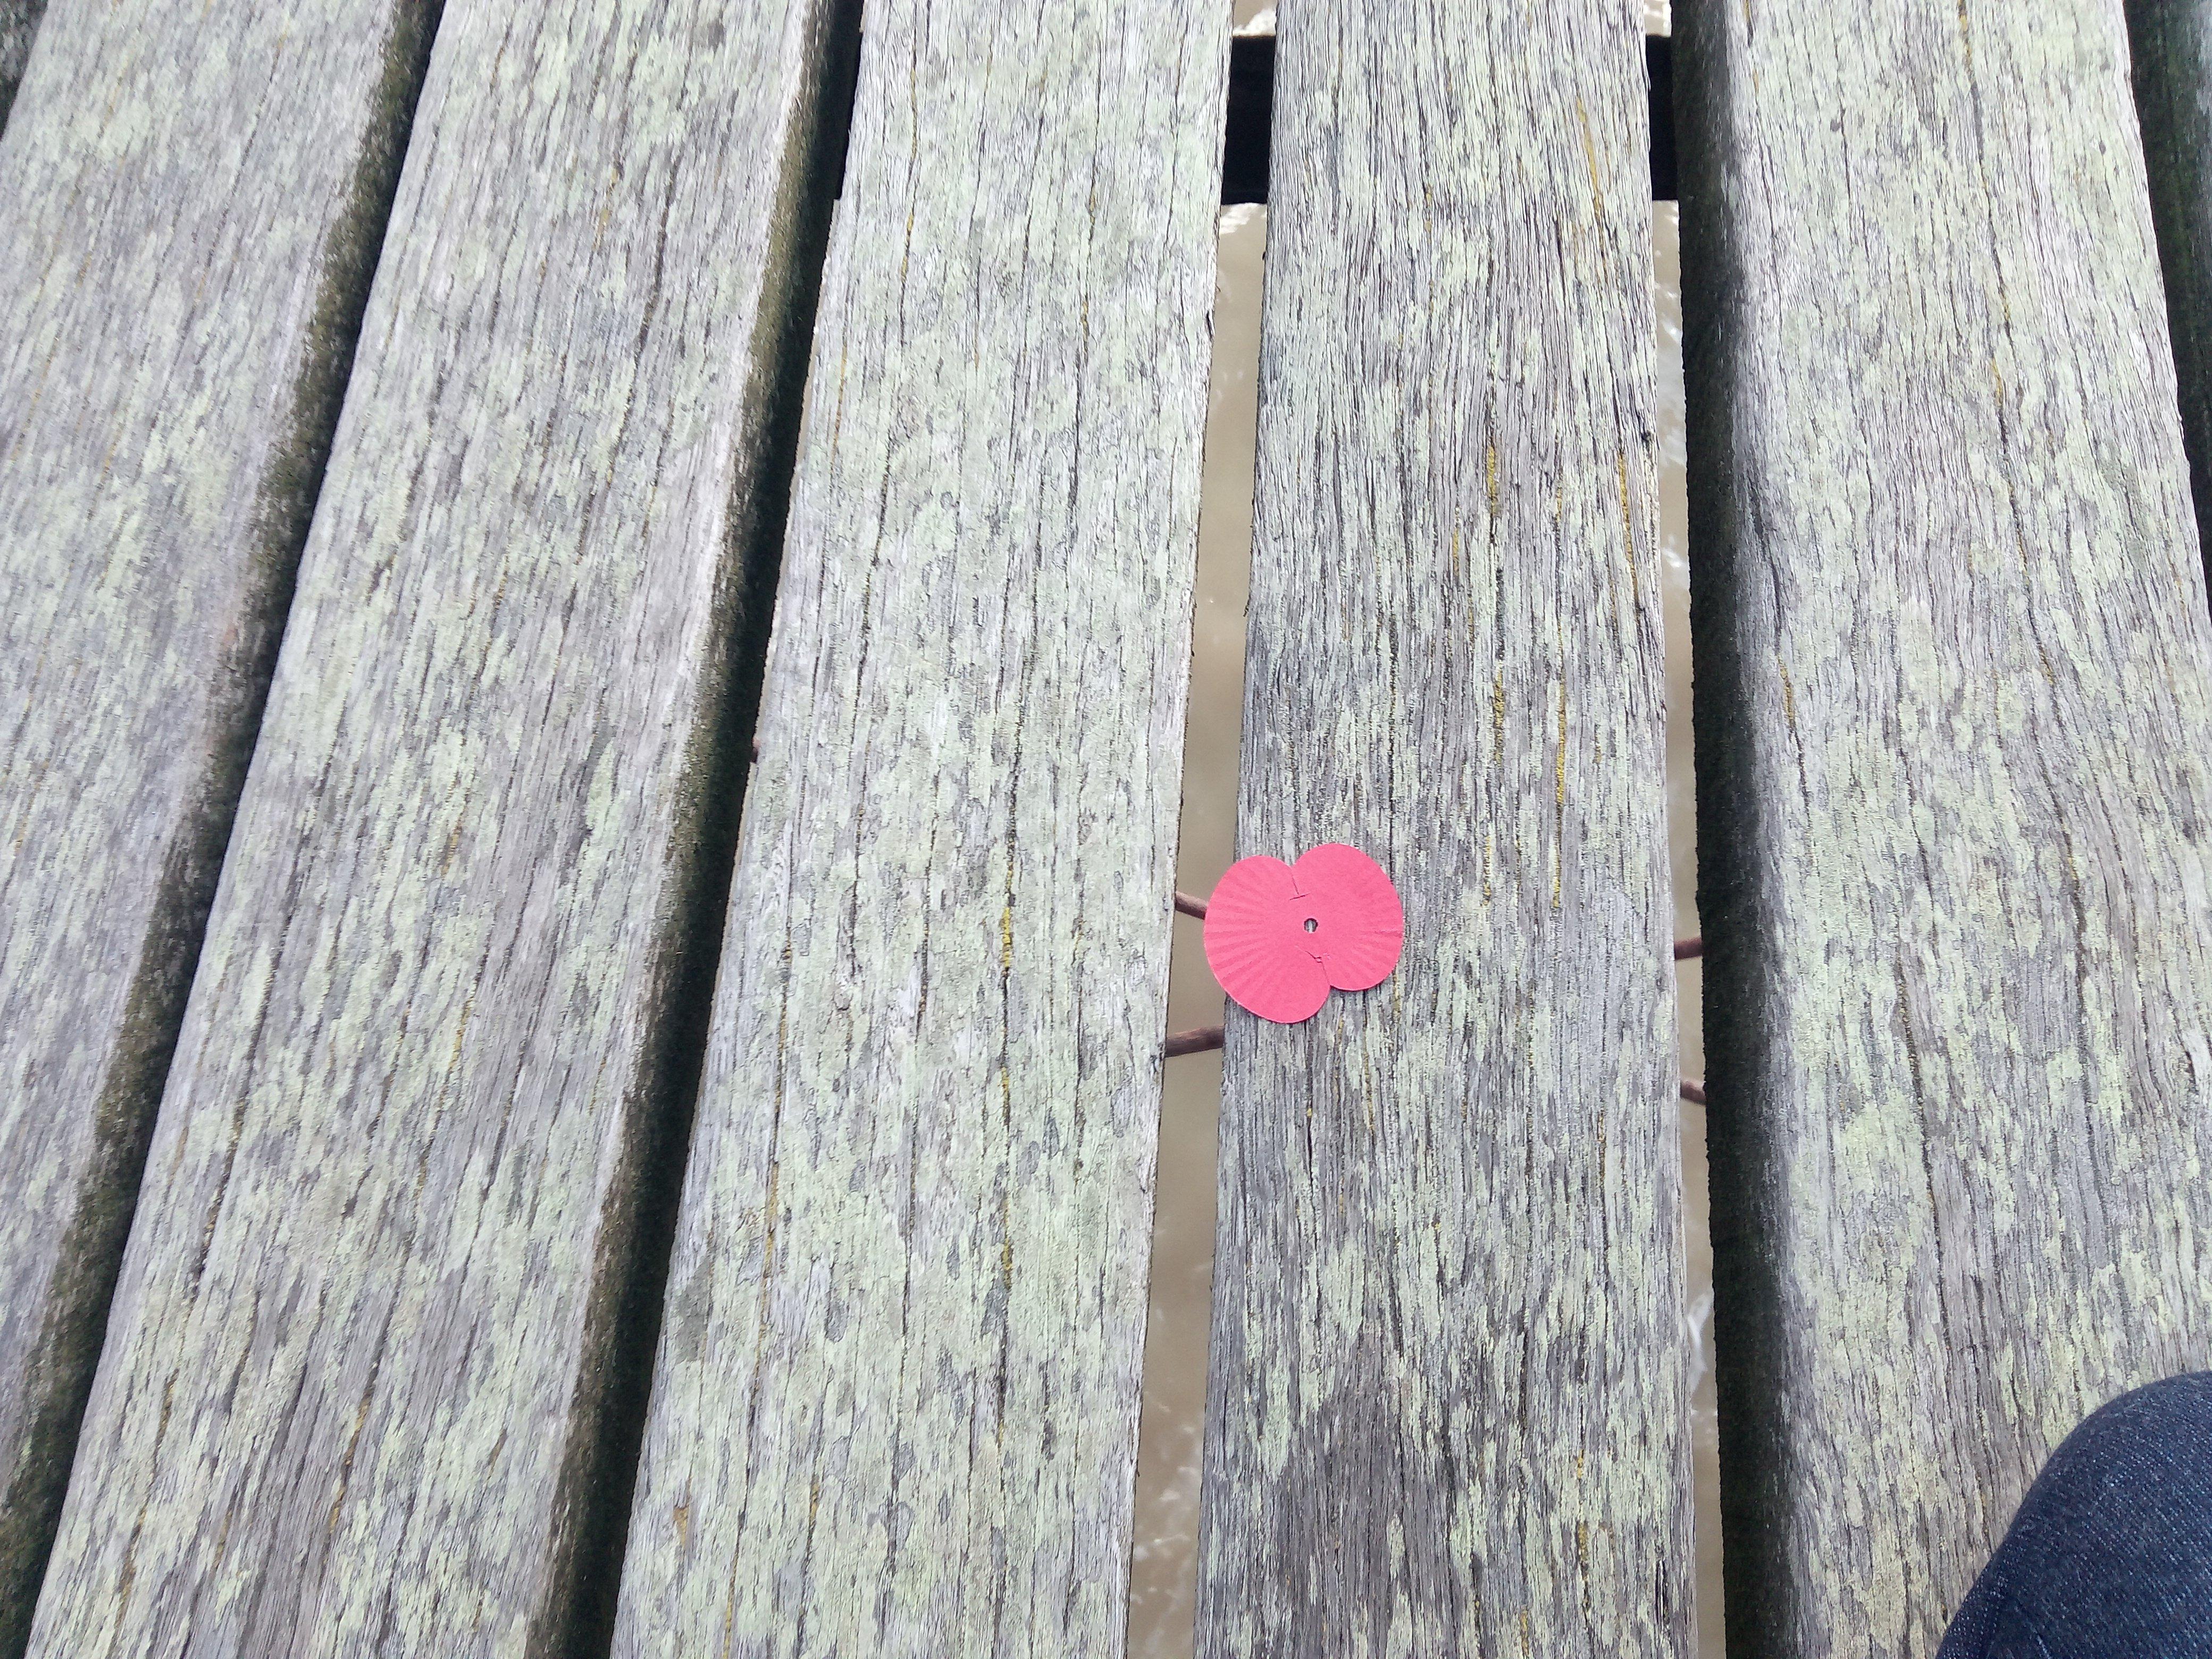 A paper poppy on the pier after the Chinook fly over